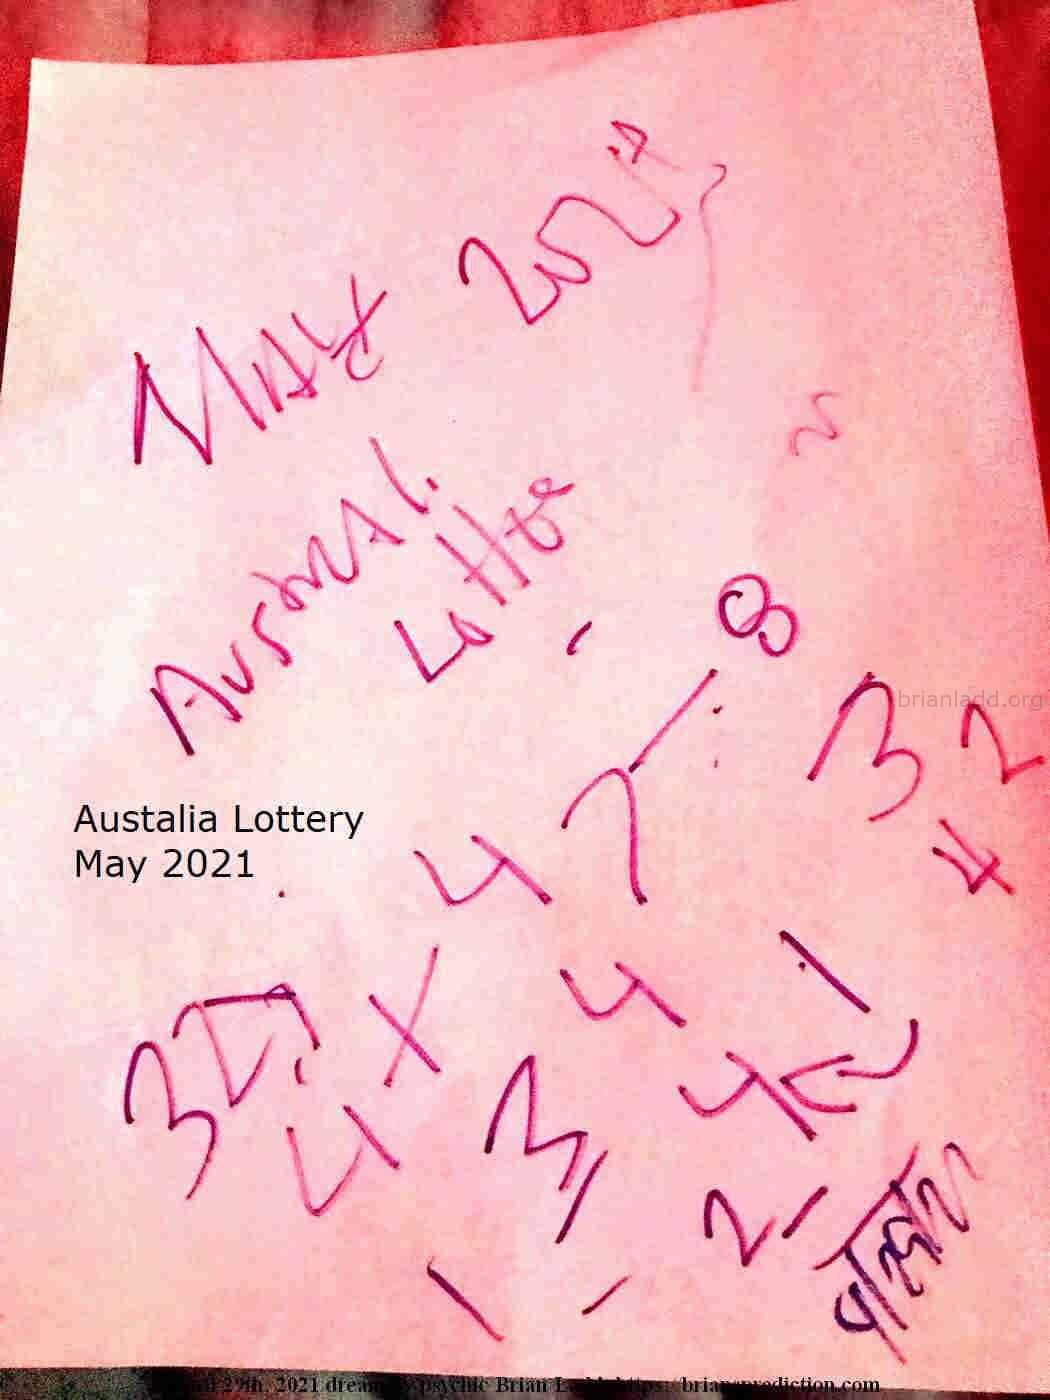 14807 29 April 2021 2 - Australia Lottery May 2021...
Australia Lottery May 2021  ( NEW!  Free lottery picks by mail, I will personally fill out your blank lottery sheet and mail it back to you for free, postage is included!  visit  https://briansprediction.com/picksbymail   )
